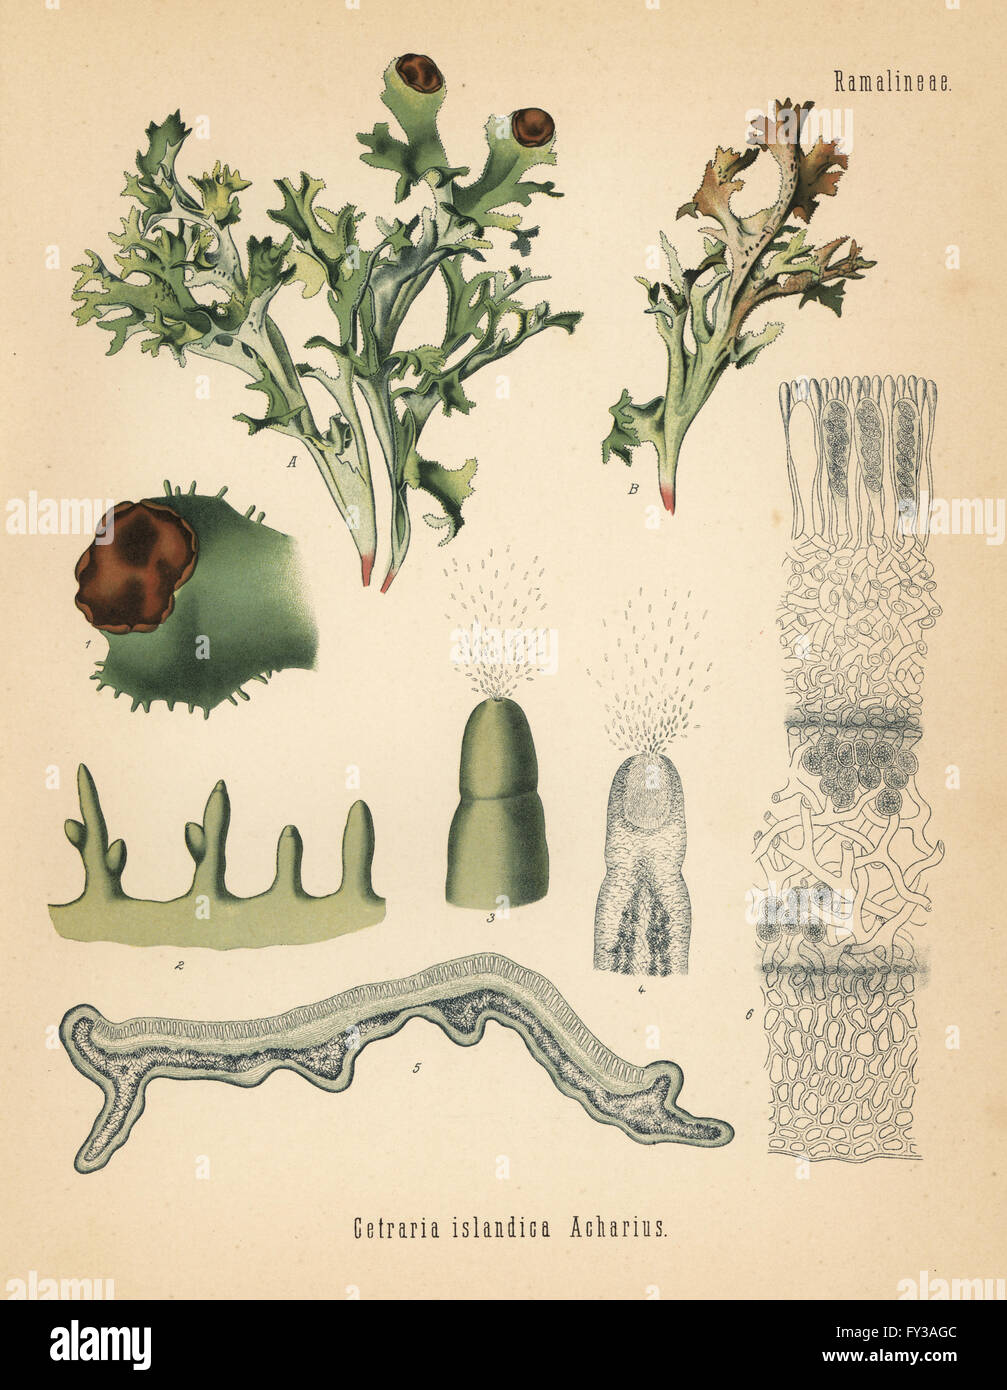 Iceland moss, Cetraria islandica. Chromolithograph after a botanical illustration from Hermann Adolph Koehler's Medicinal Plants, edited by Gustav Pabst, Koehler, Germany, 1887. Stock Photo